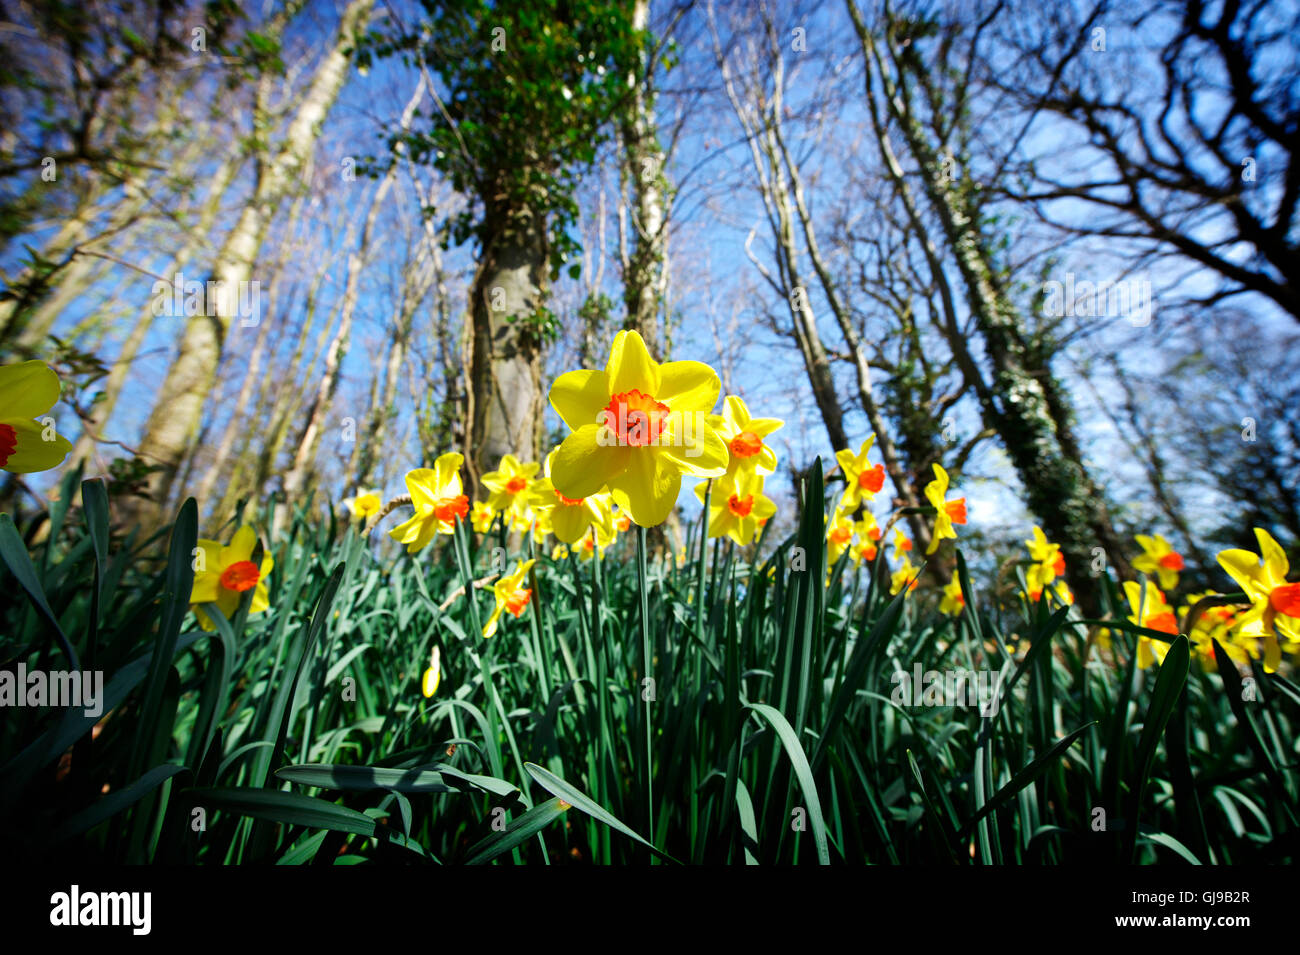 Daffodils in Norfolk, near the Broads Spring 2010 Stock Photo